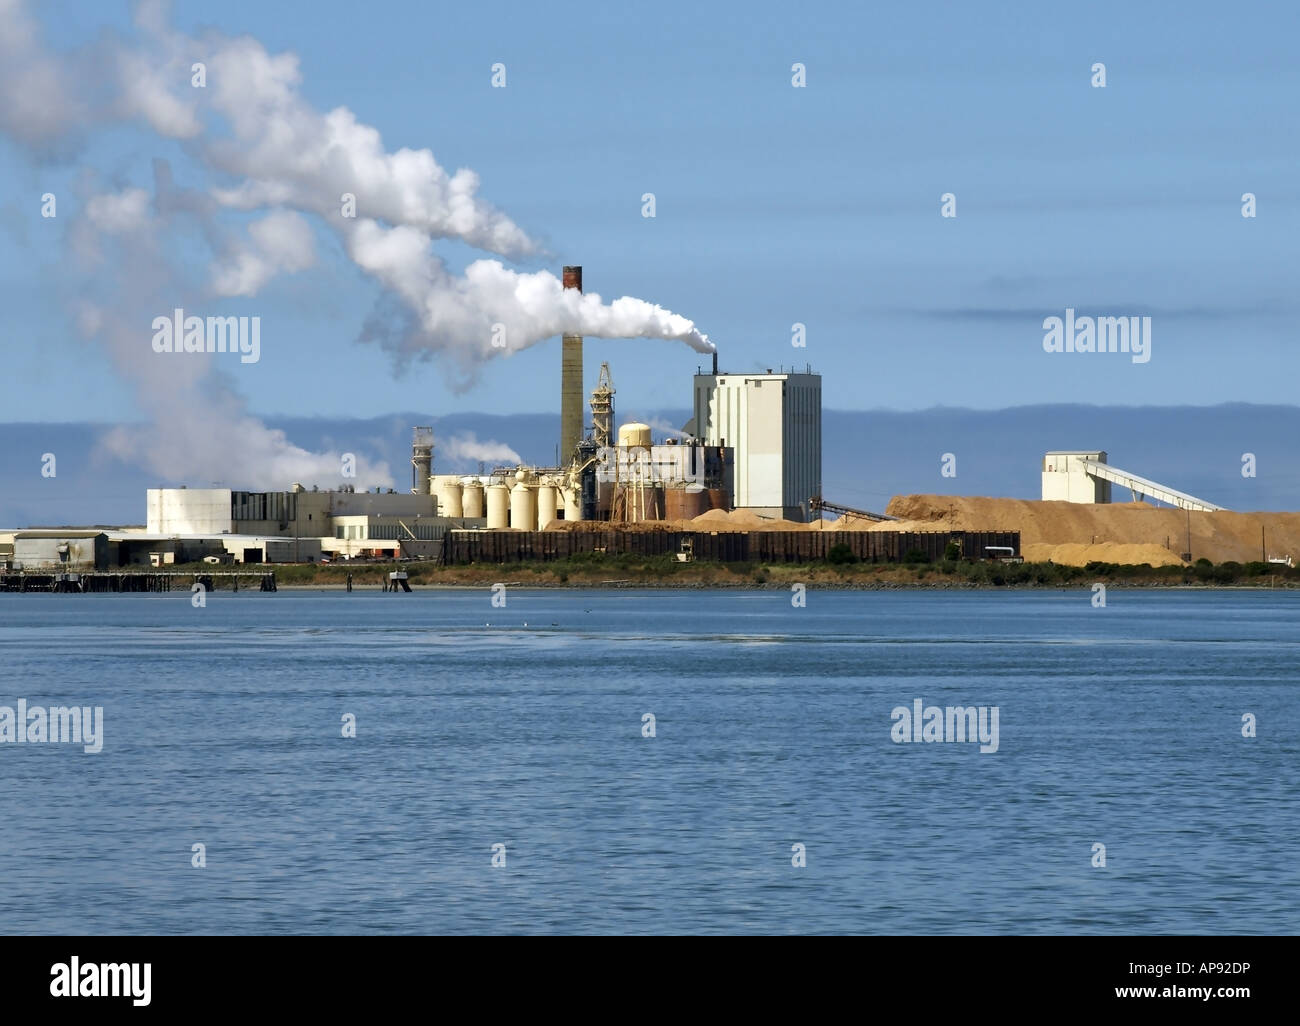 Stock image of a wood processing facility on the edge of Humbolt Bay near Eureka California in landscape format Stock Photo